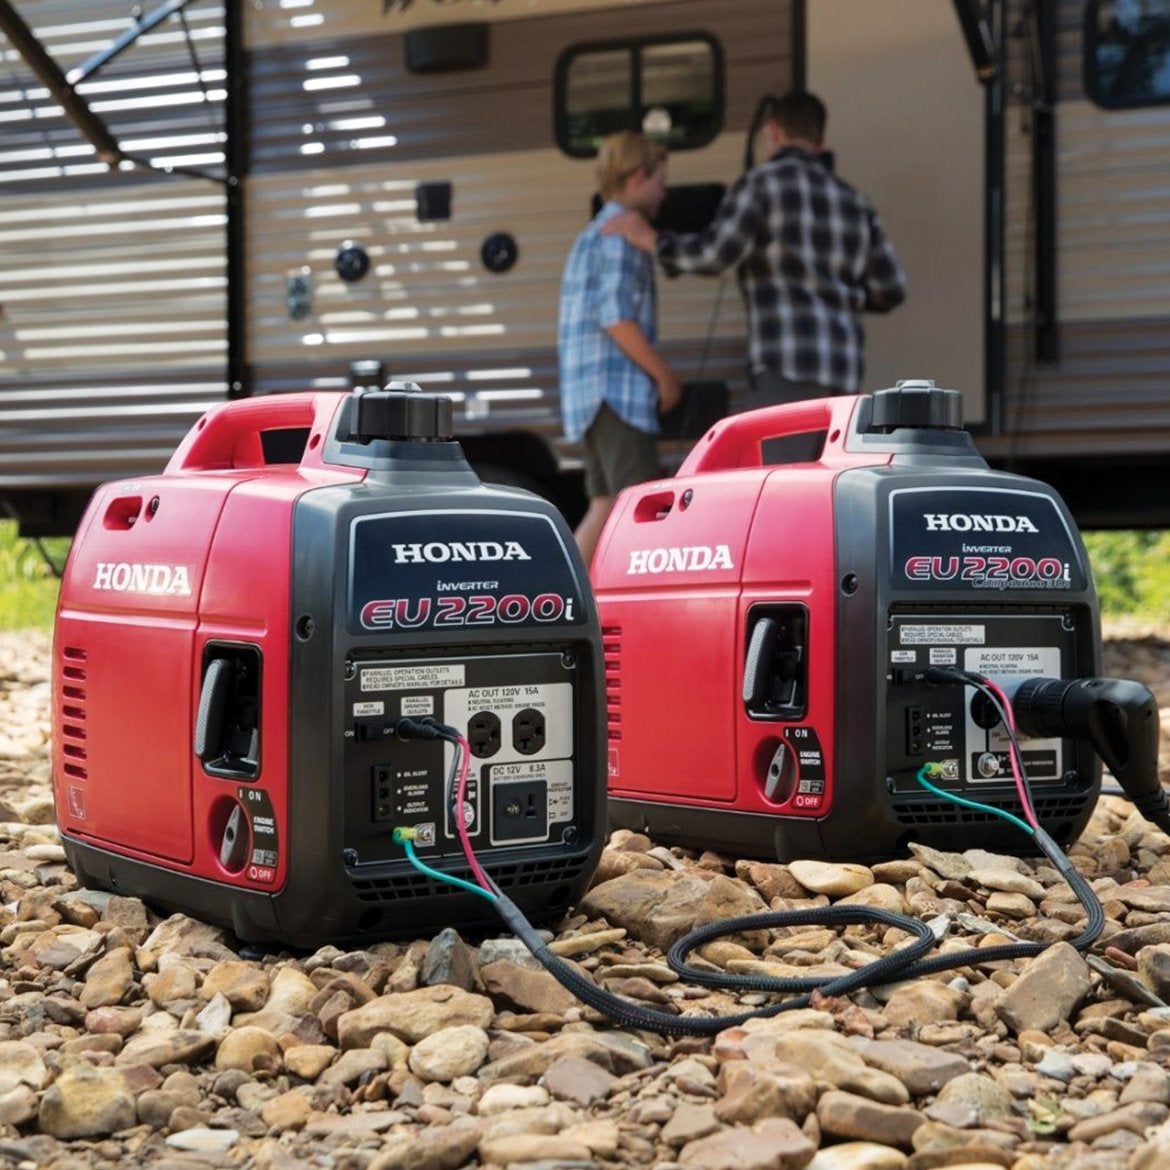 11 Camping Generators That Are Surprisingly Quiet and Efficient